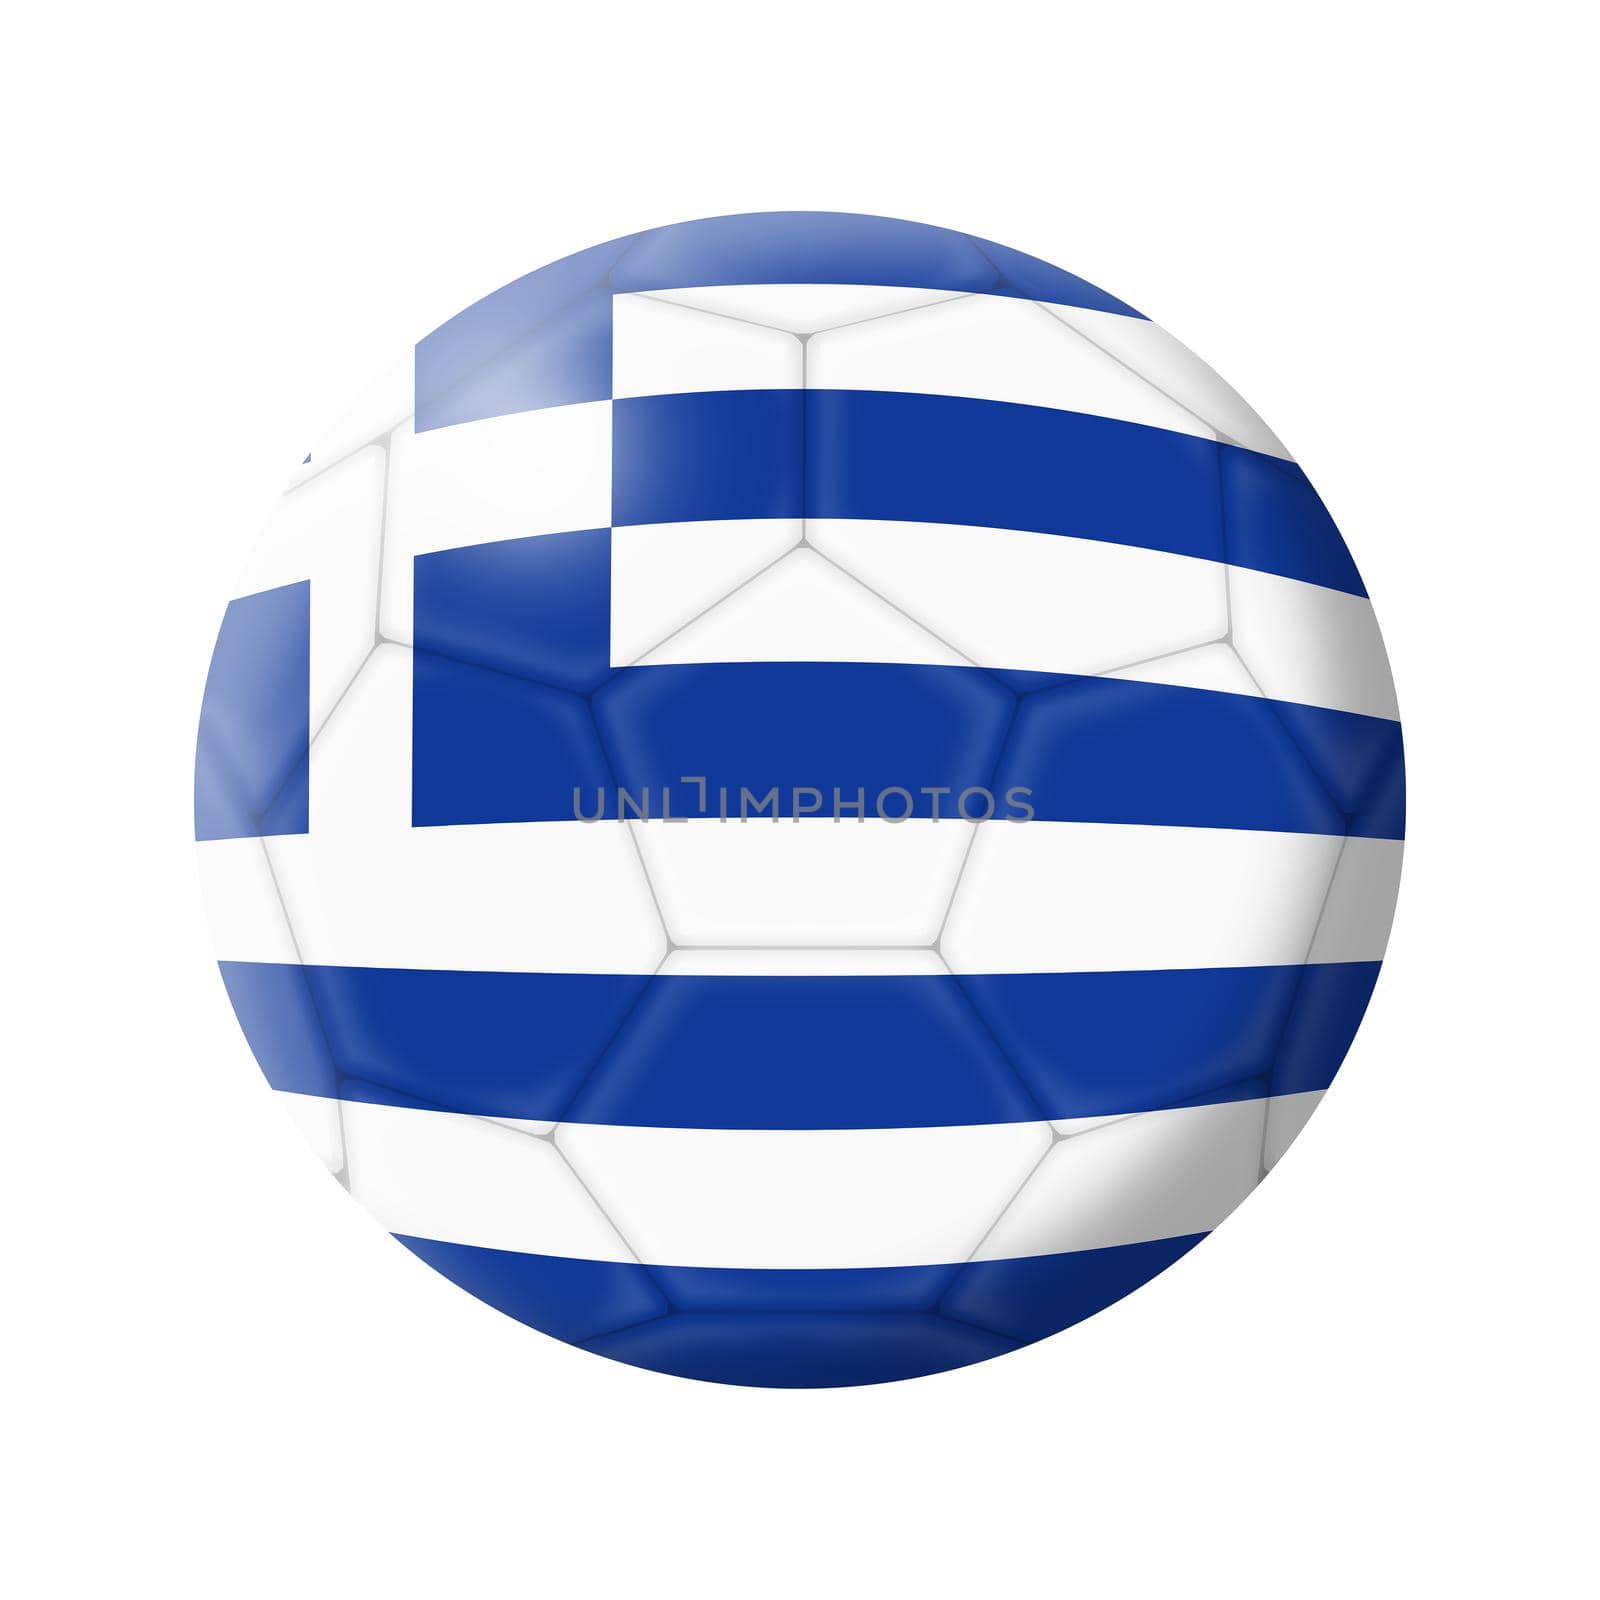 A Greece soccer ball football 3d illustration isolated on white with clipping path